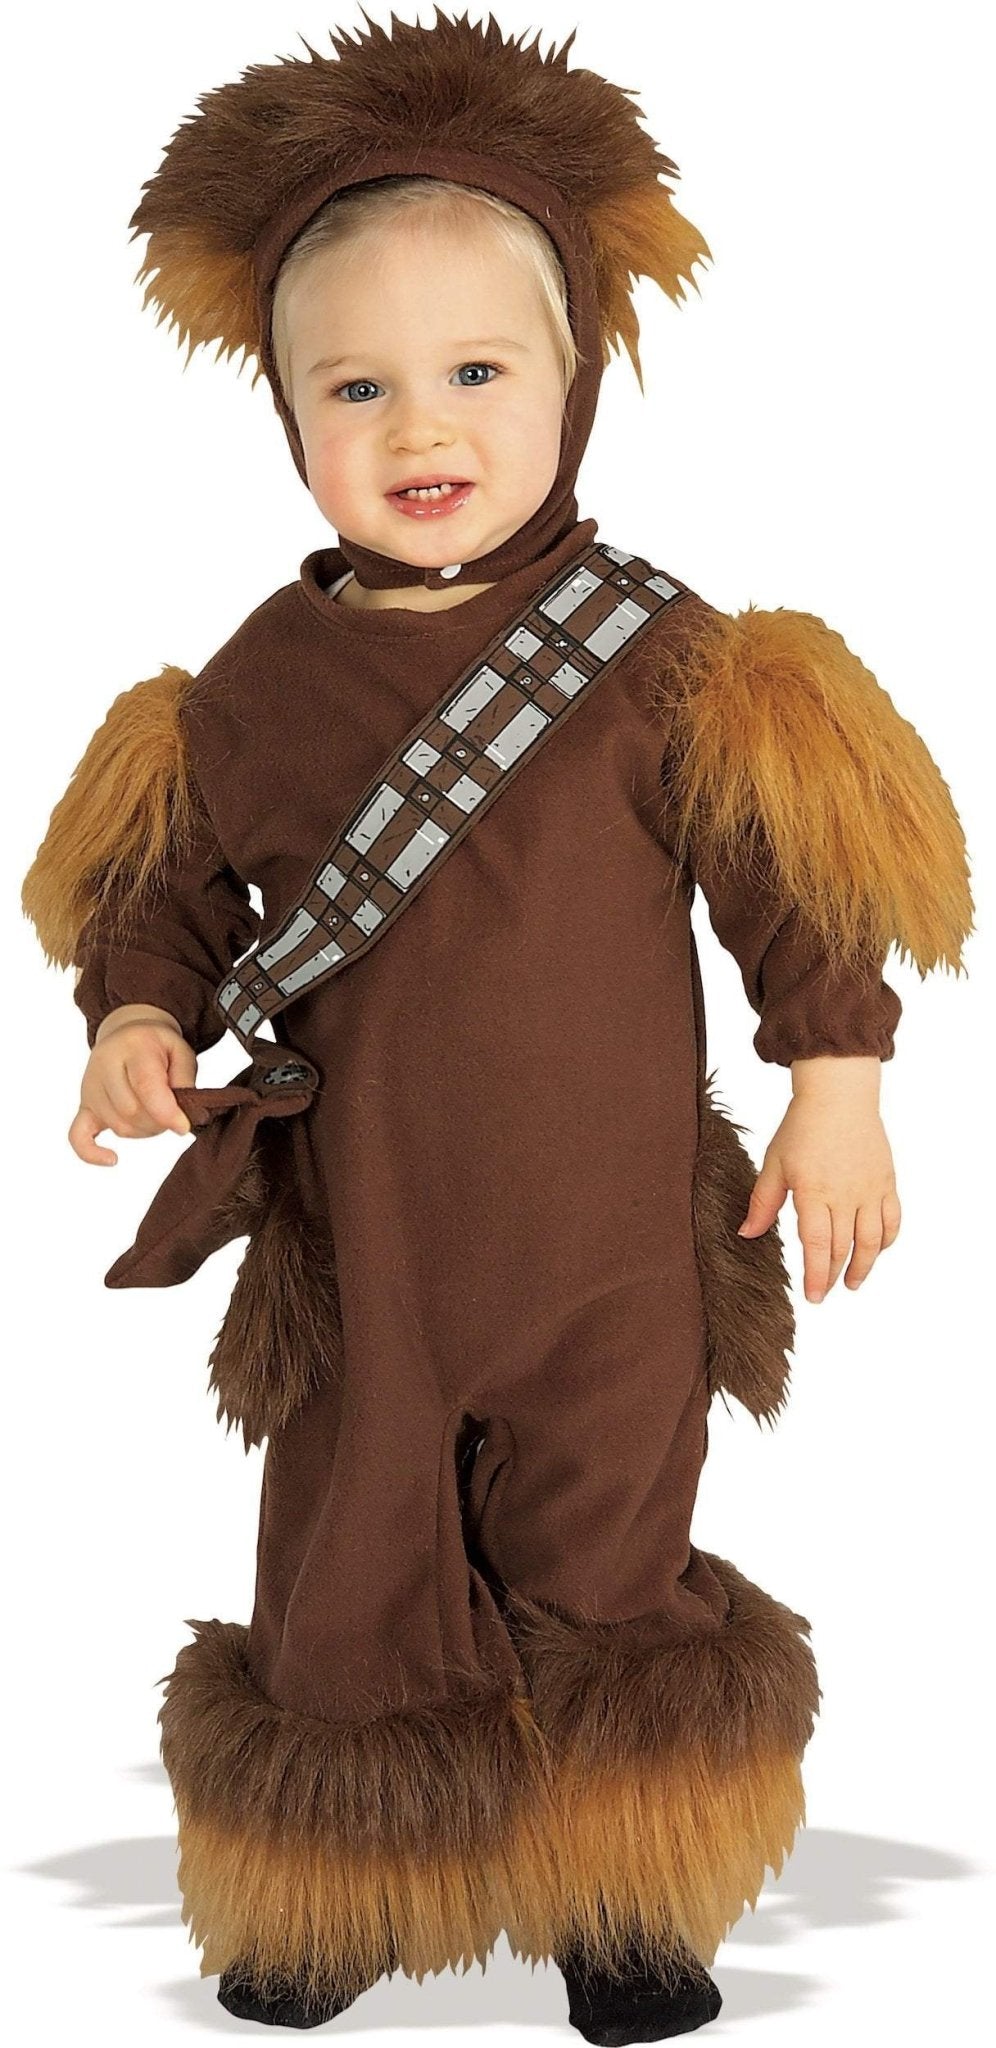 Toddler Boys Chewbacca Costume - Star Wars - JJ's Party House